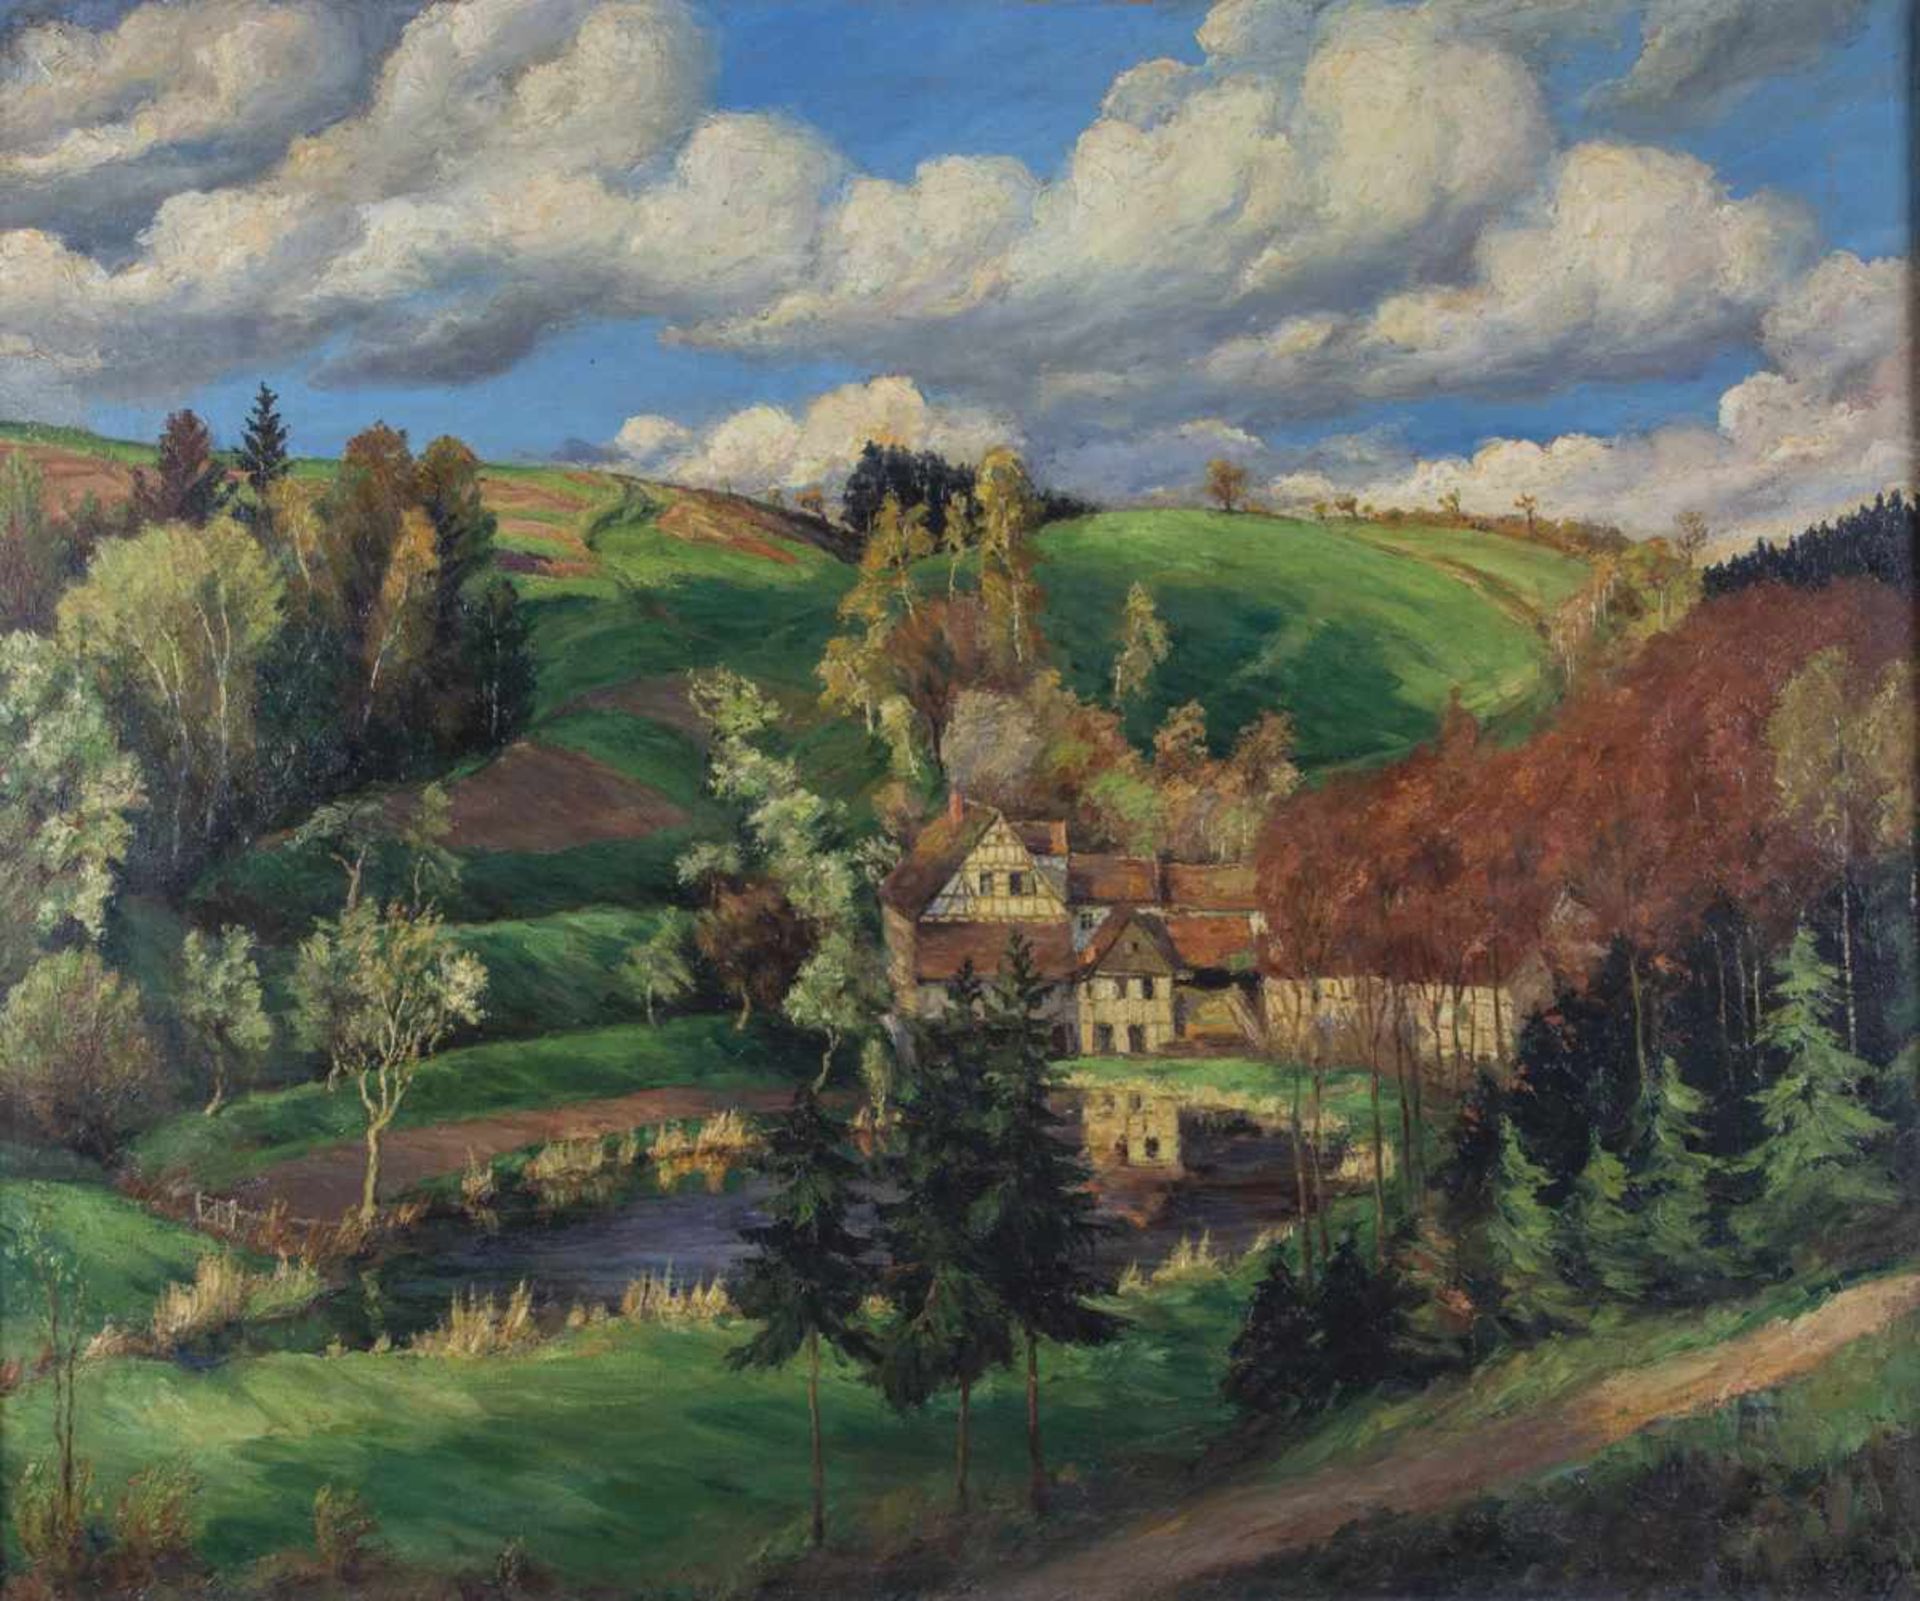 Willy Berthold. 1884 Eisenberg - 1941 ibid. Thuringian landscape with homestead. Oil oncanvas.